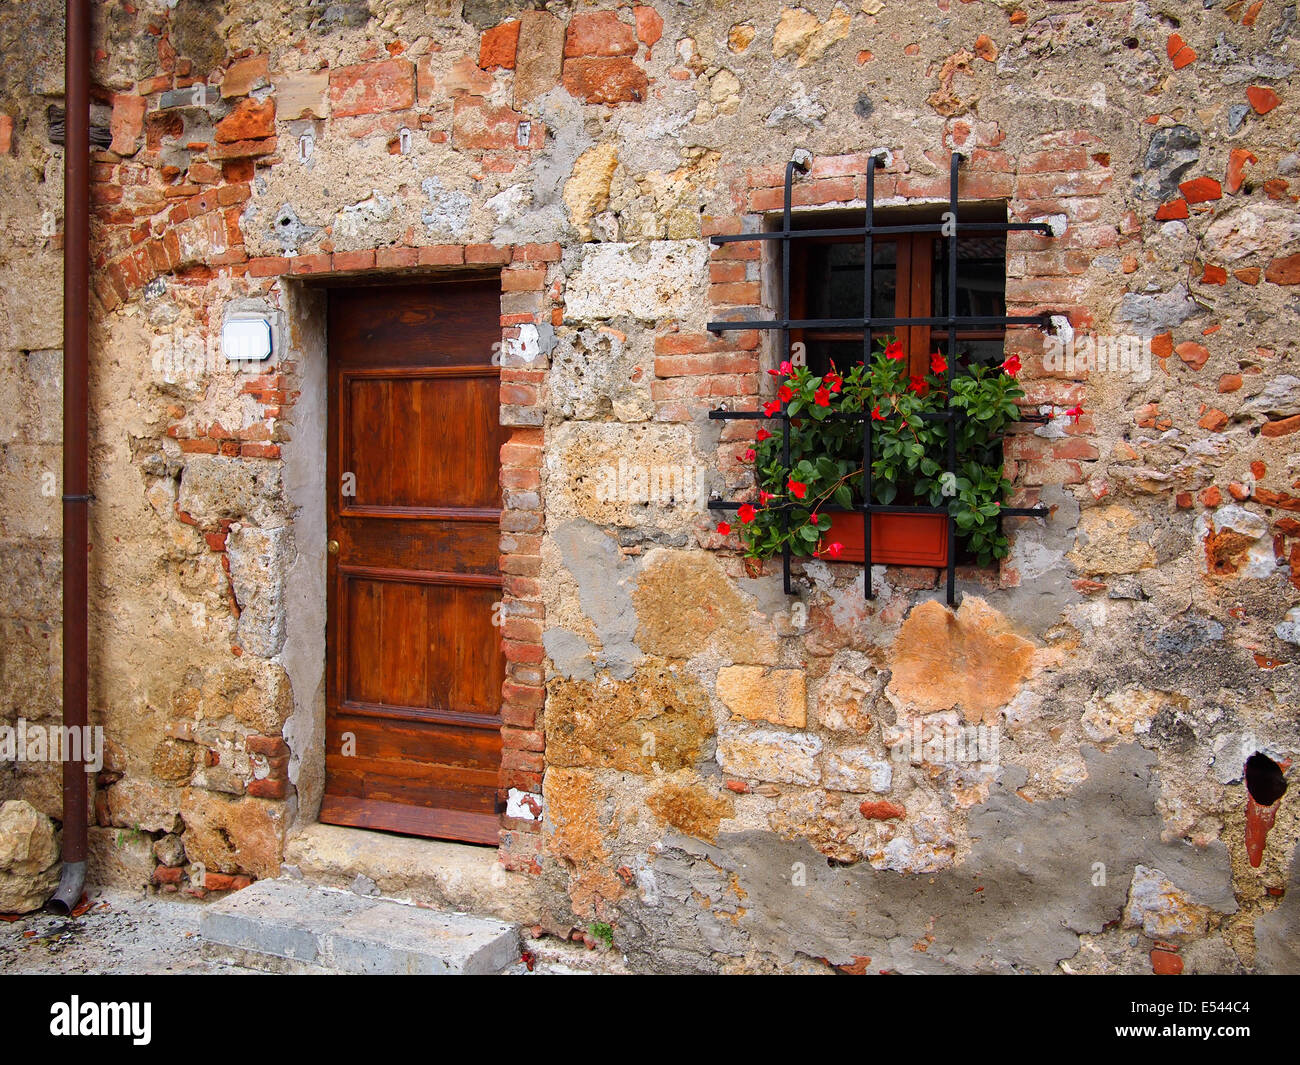 Old wooden door in a brick facade with flowers of a house in an old Italian town. Stock Photo